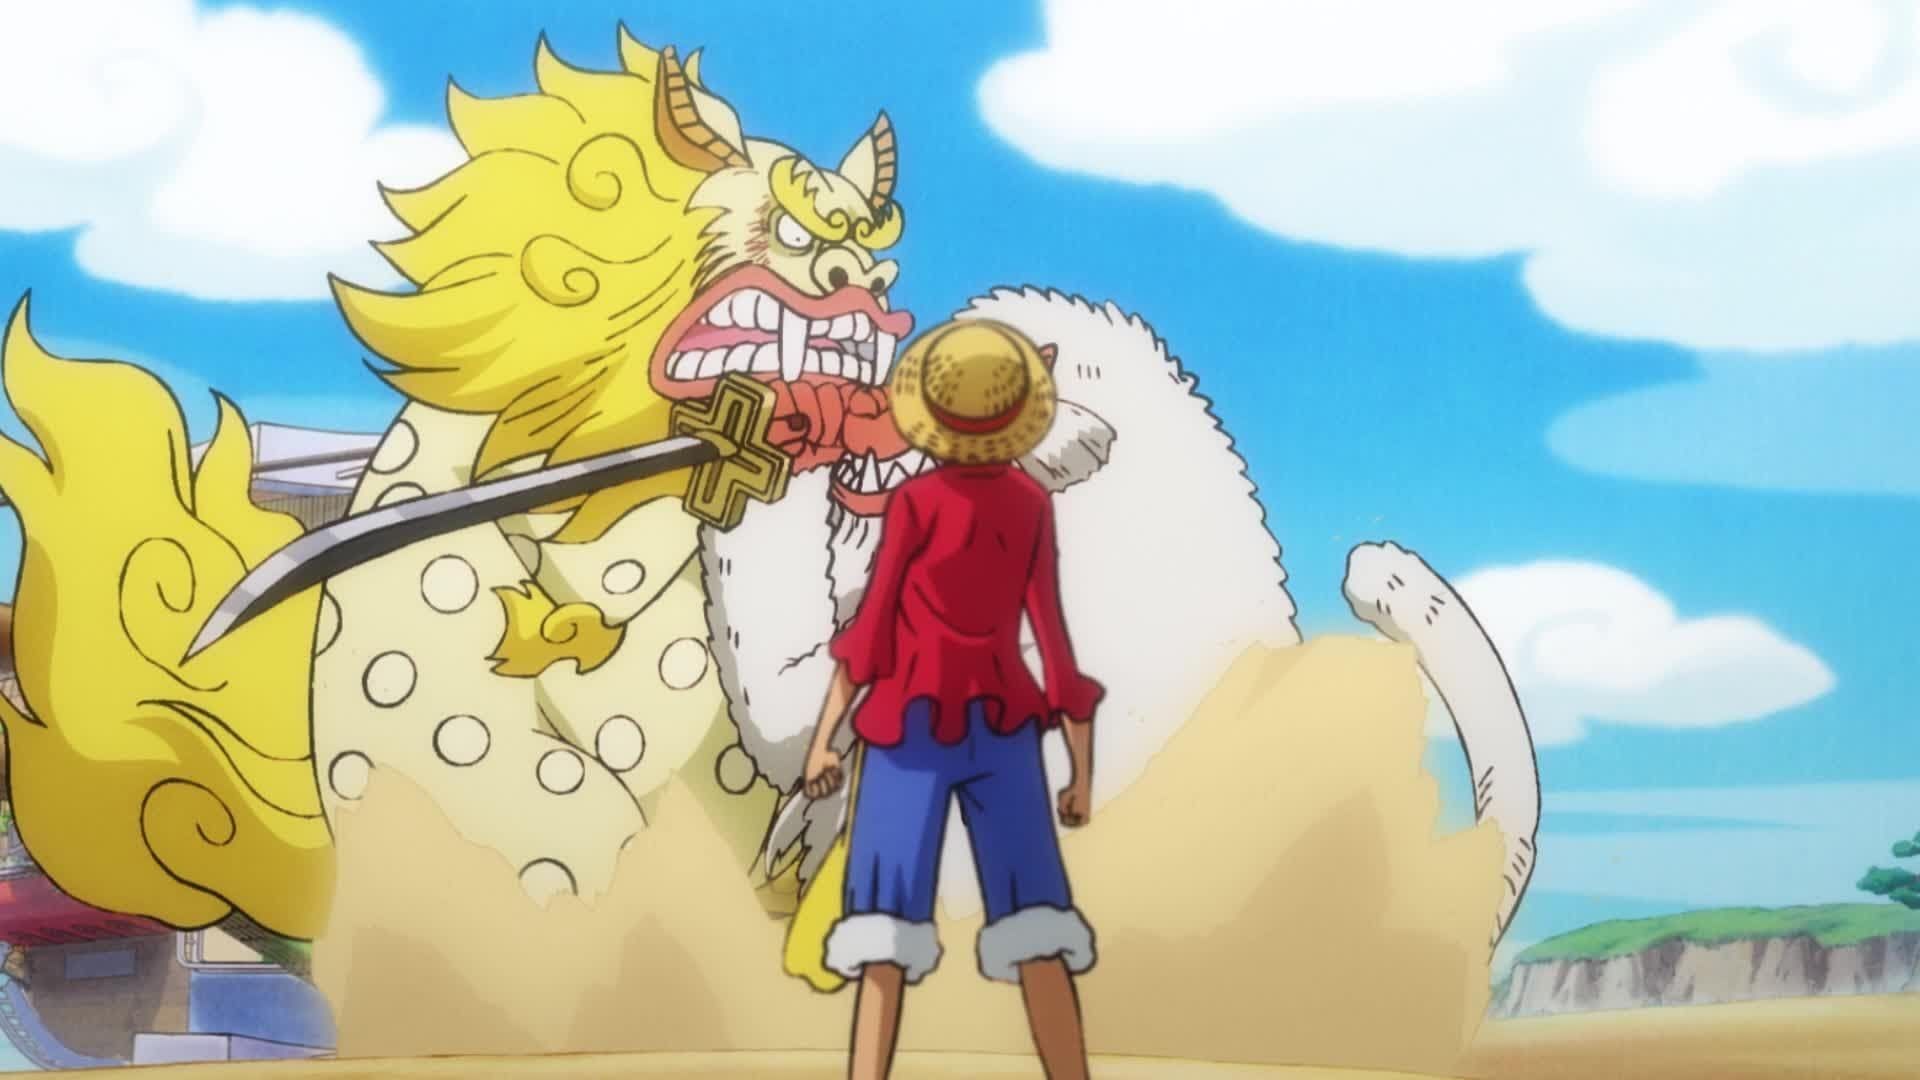 One Piece: WANO KUNI (892-Current) The Power of Ice Oni! A New Version of  the Plague Rounds! - Watch on Crunchyroll